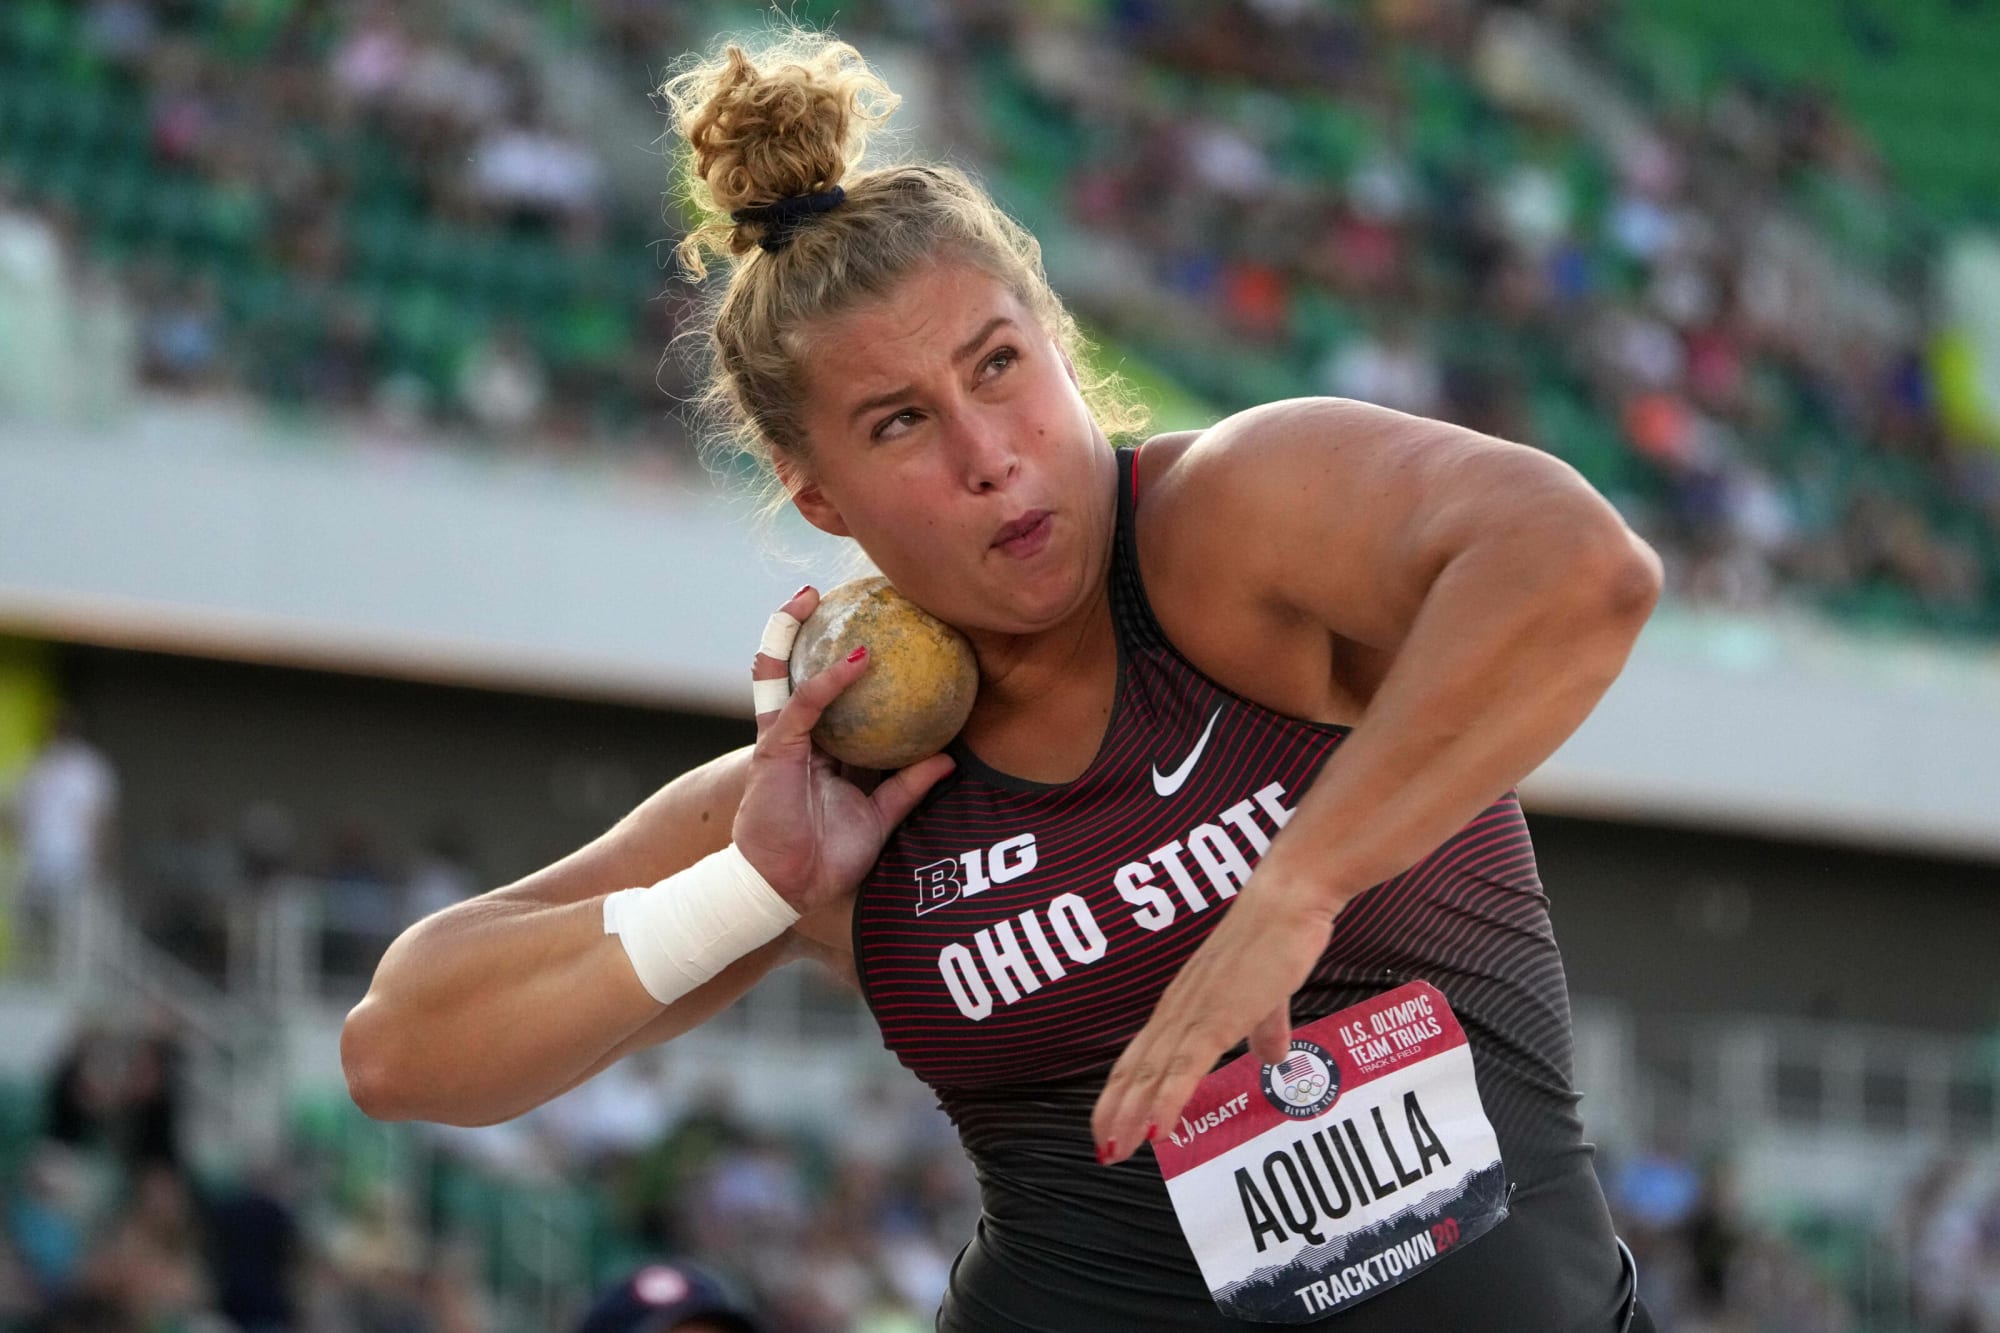 Ohio State women's track and field qualify 3 for Olympics